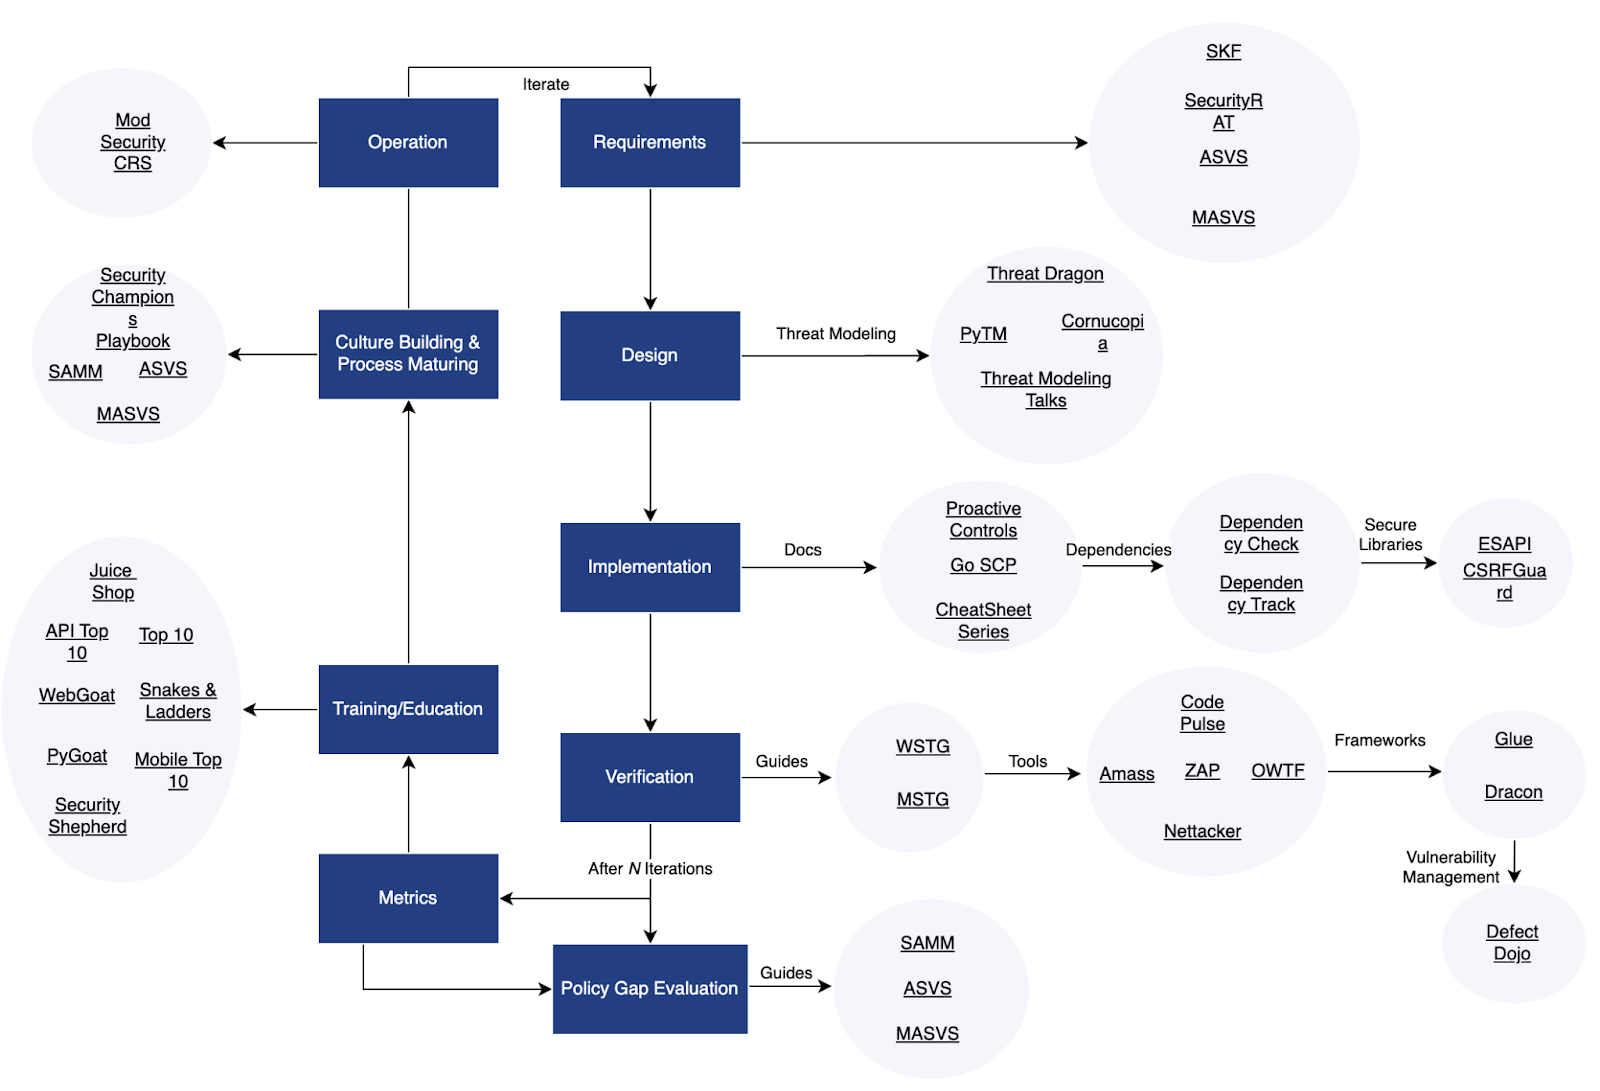 The CRE map of OWASP projects to various parts of the SDLC